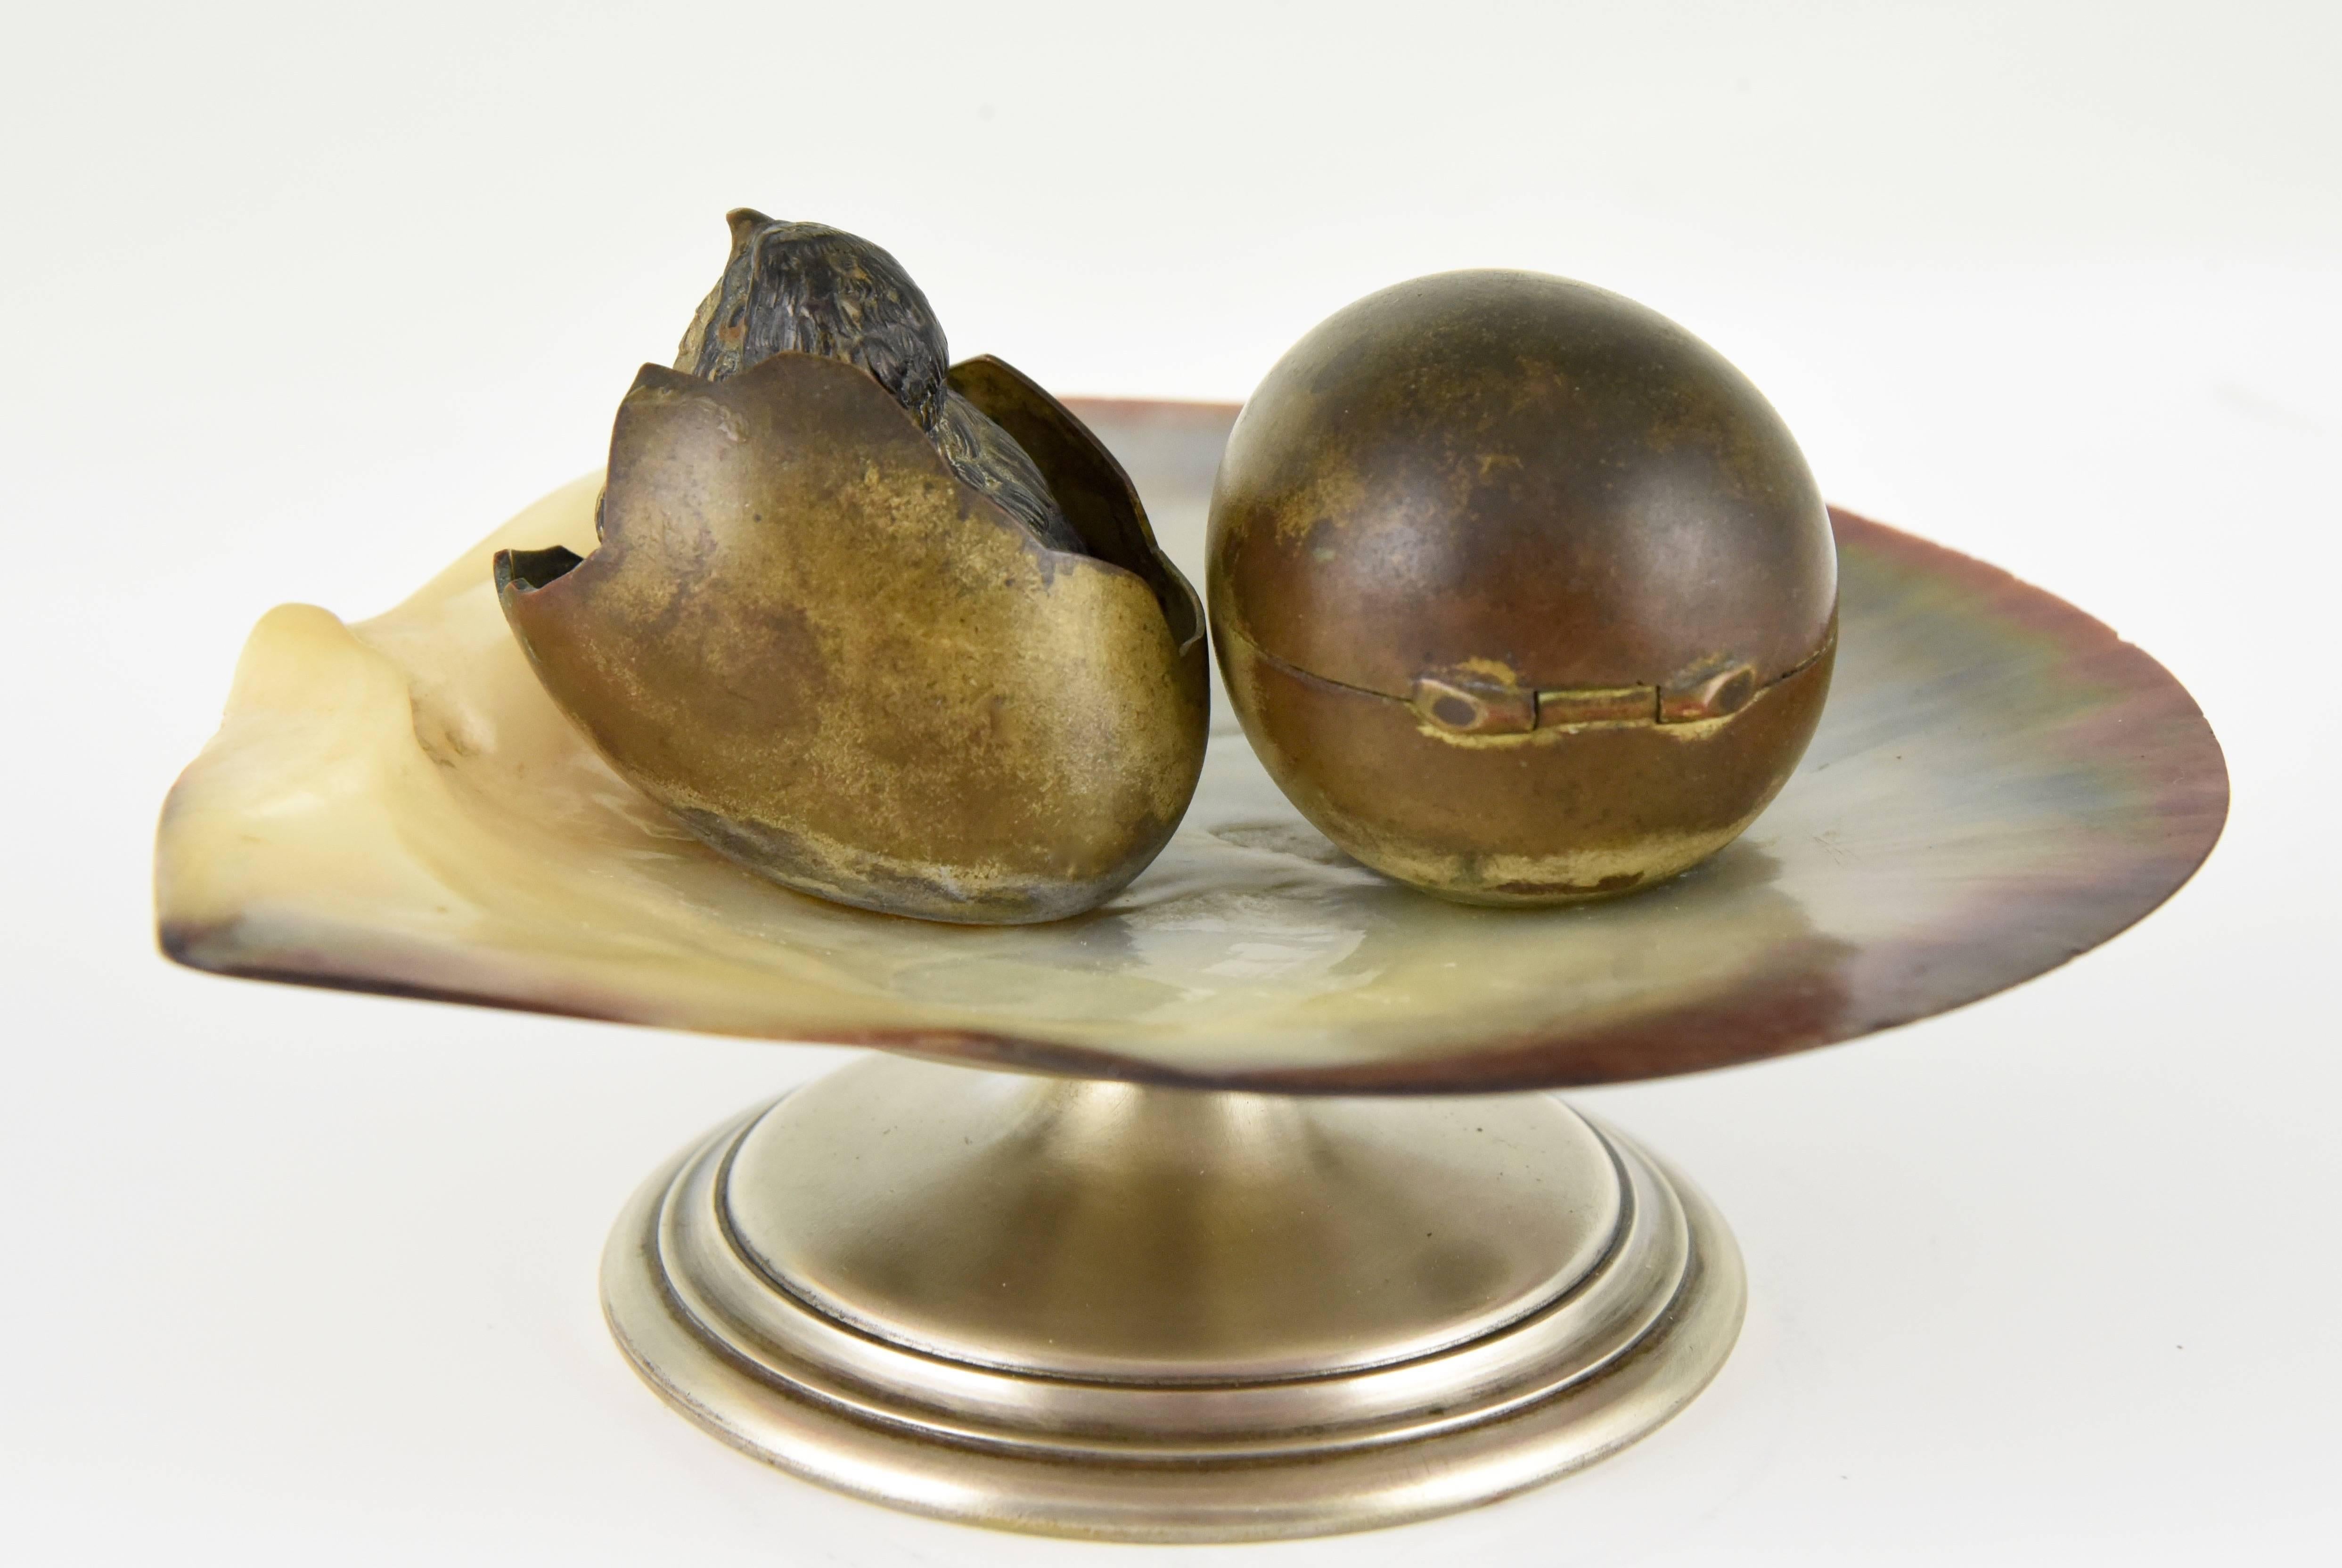 20th Century Antique Vienna Bronze Inkwell Tray with Bird and Egg Shell on Natural Shell 1900